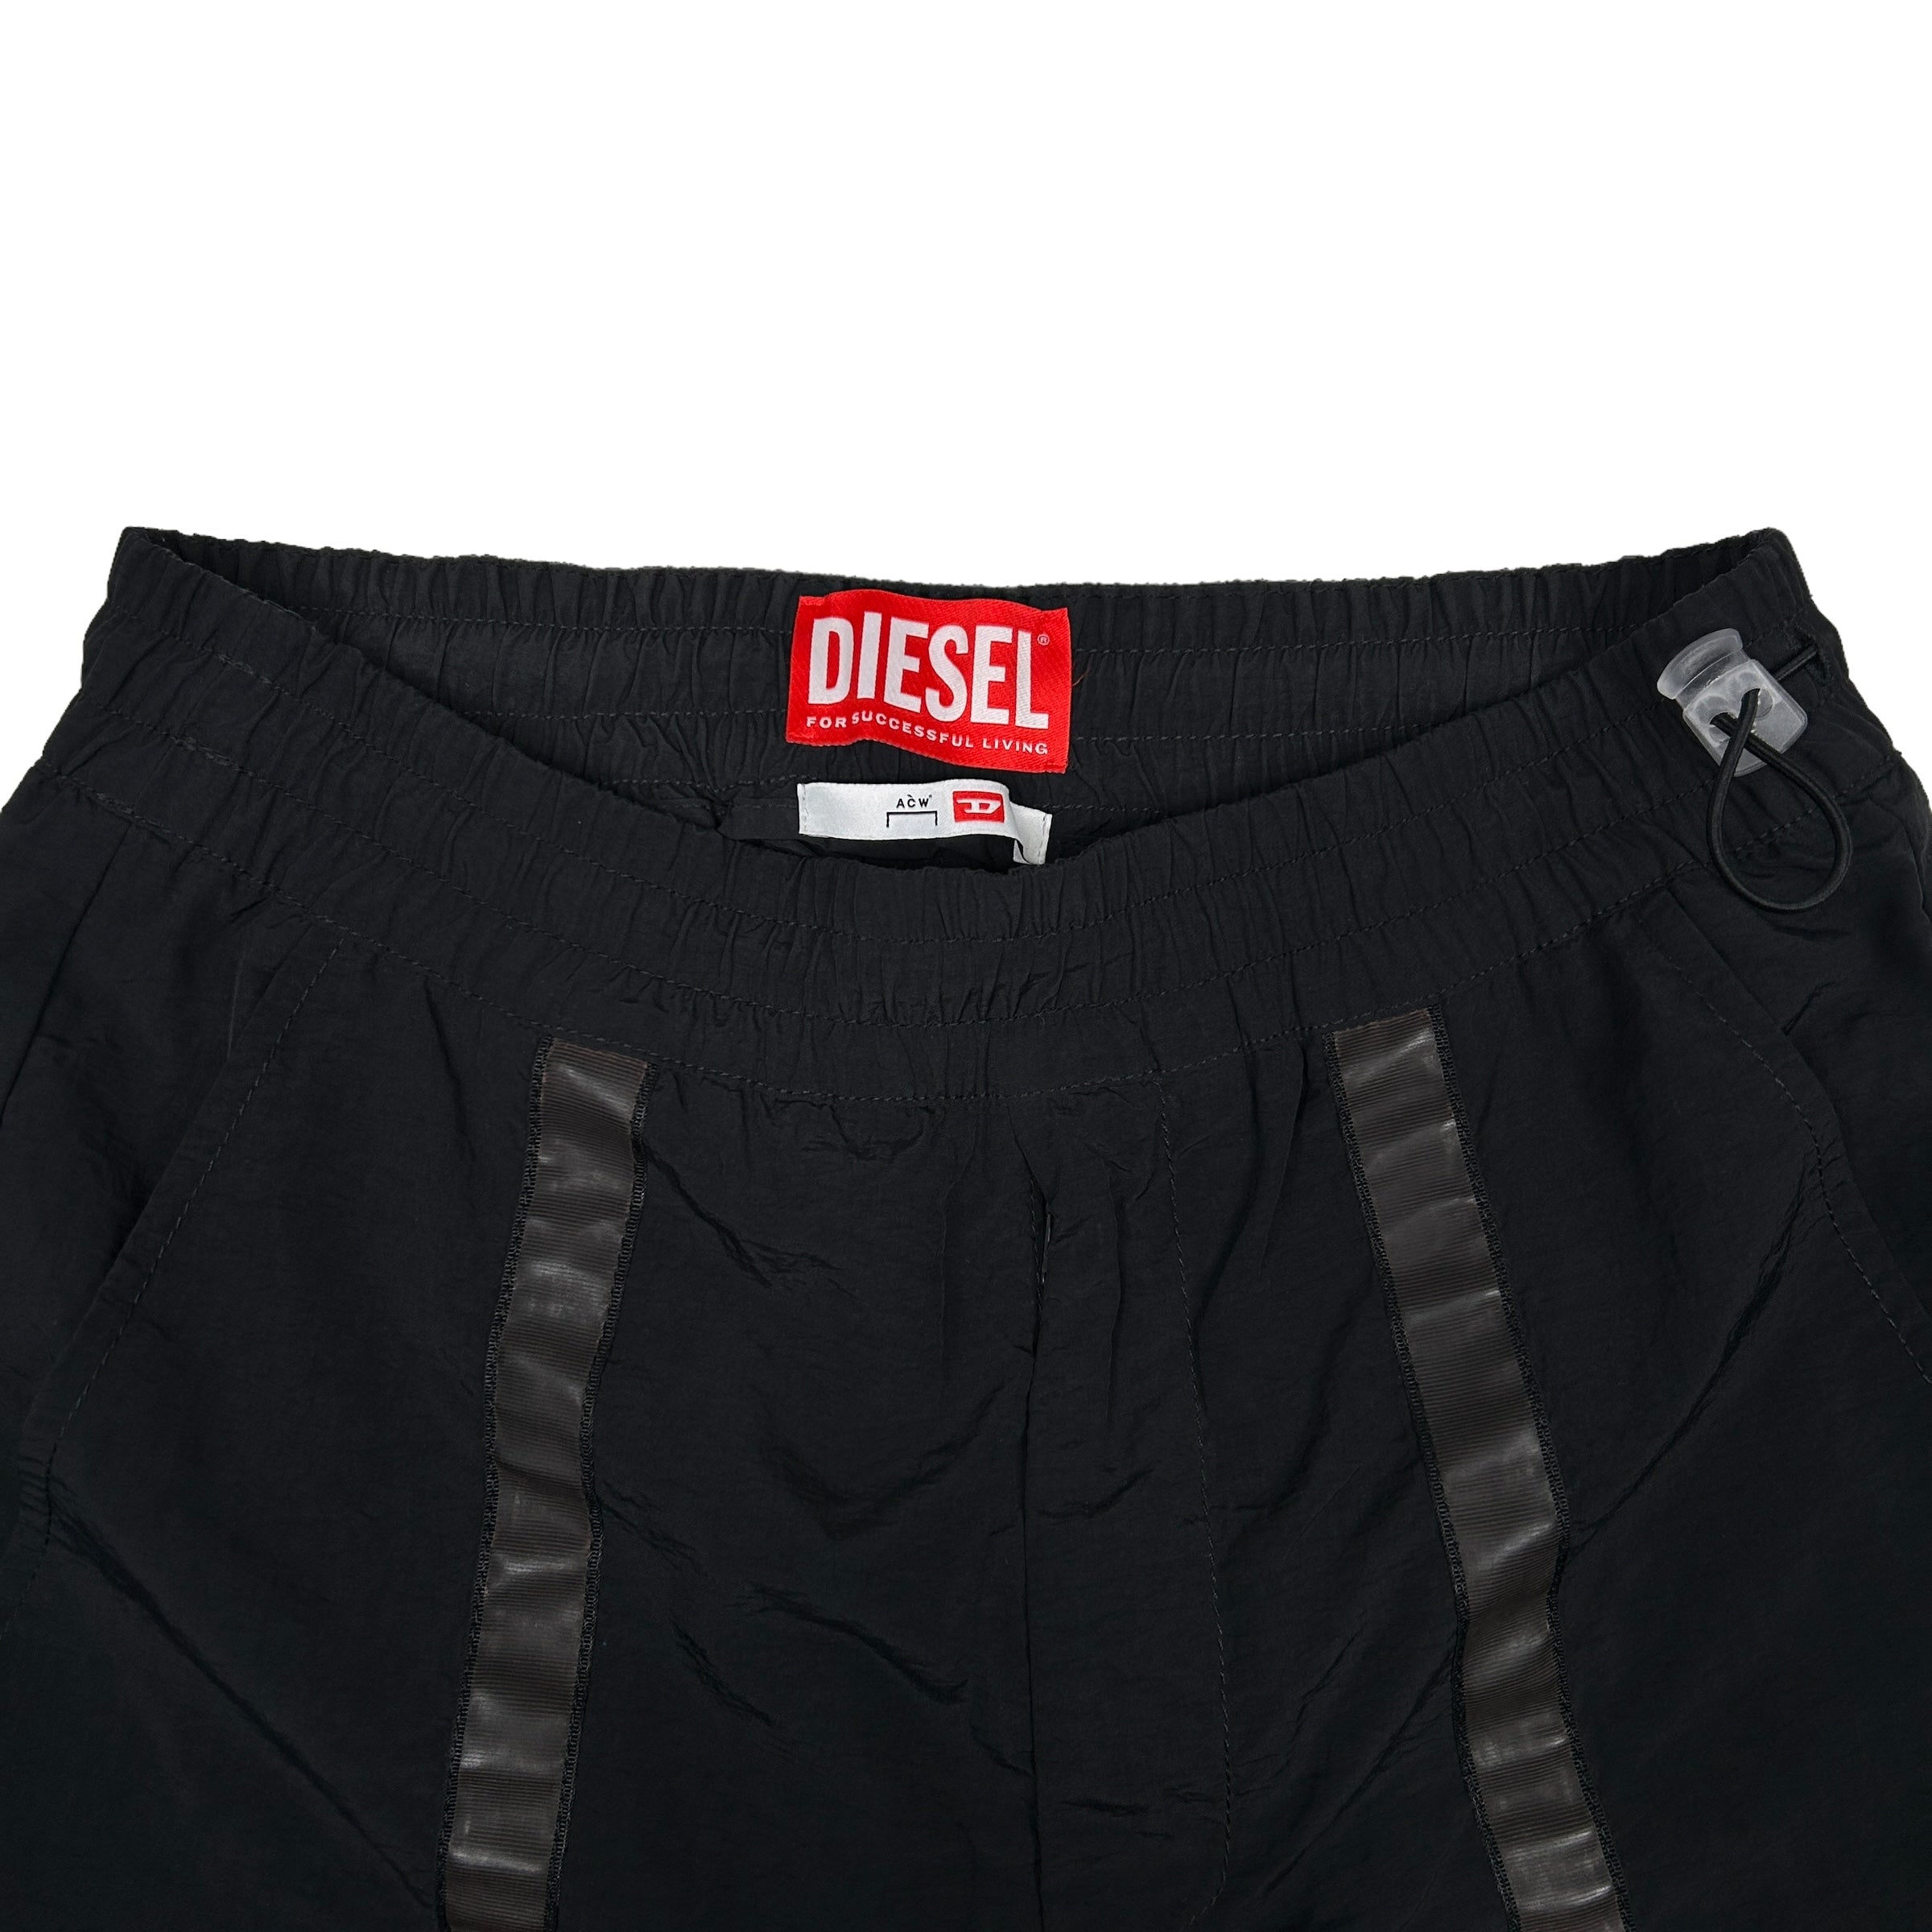 DIESEL X A COLD WALL* RED TAG SNAP BUTTON NYLON PANTS